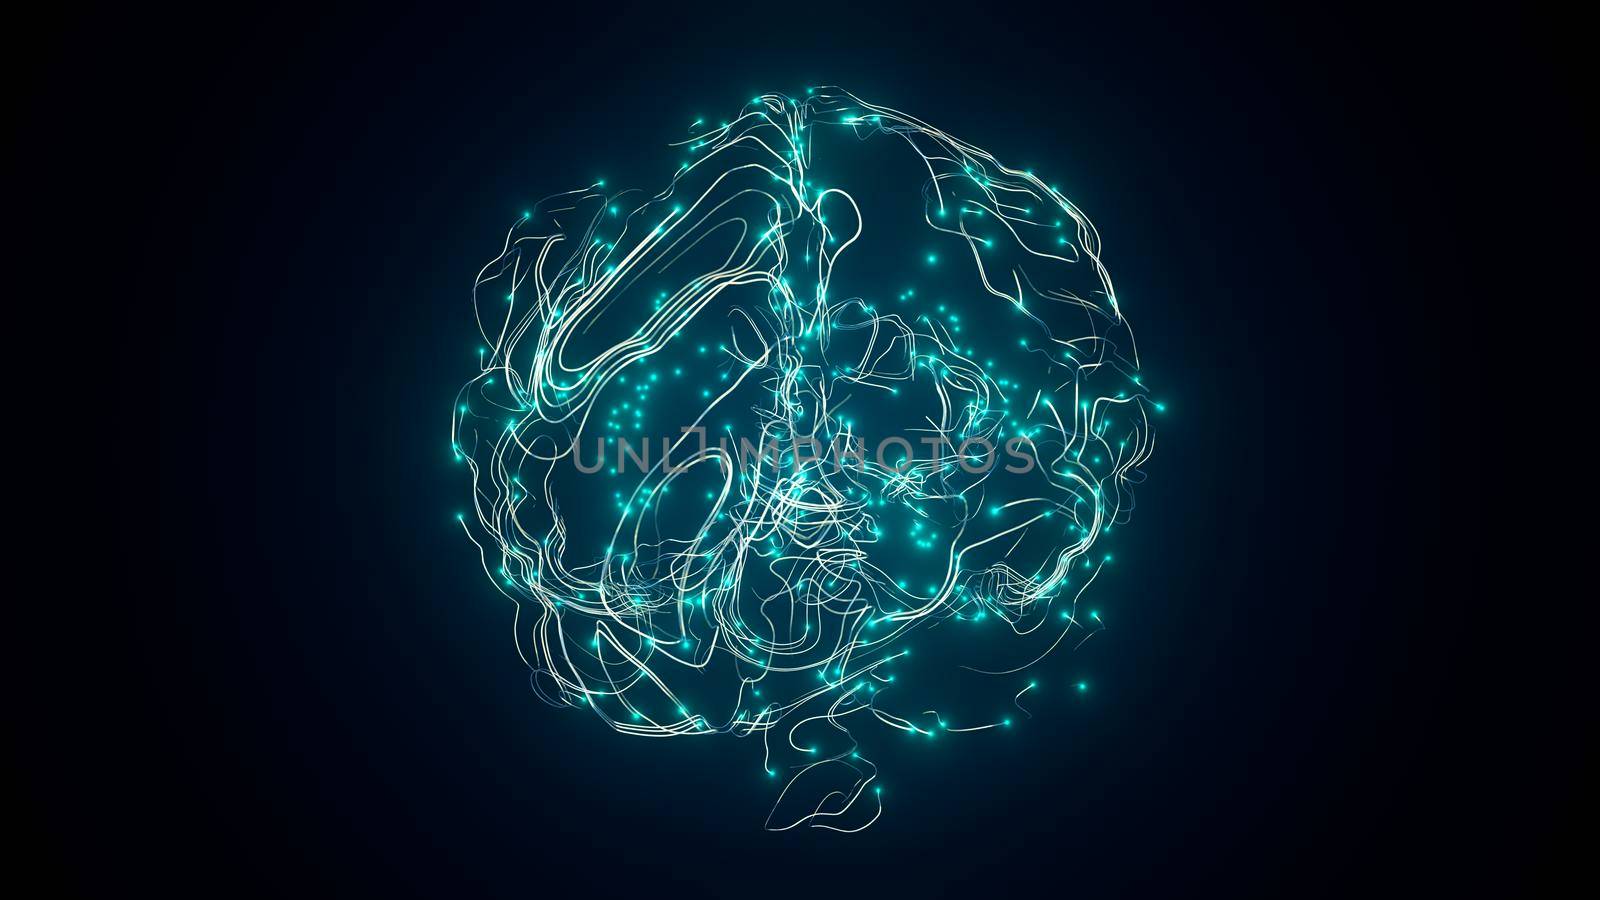 Brain activity visualization with particles effect